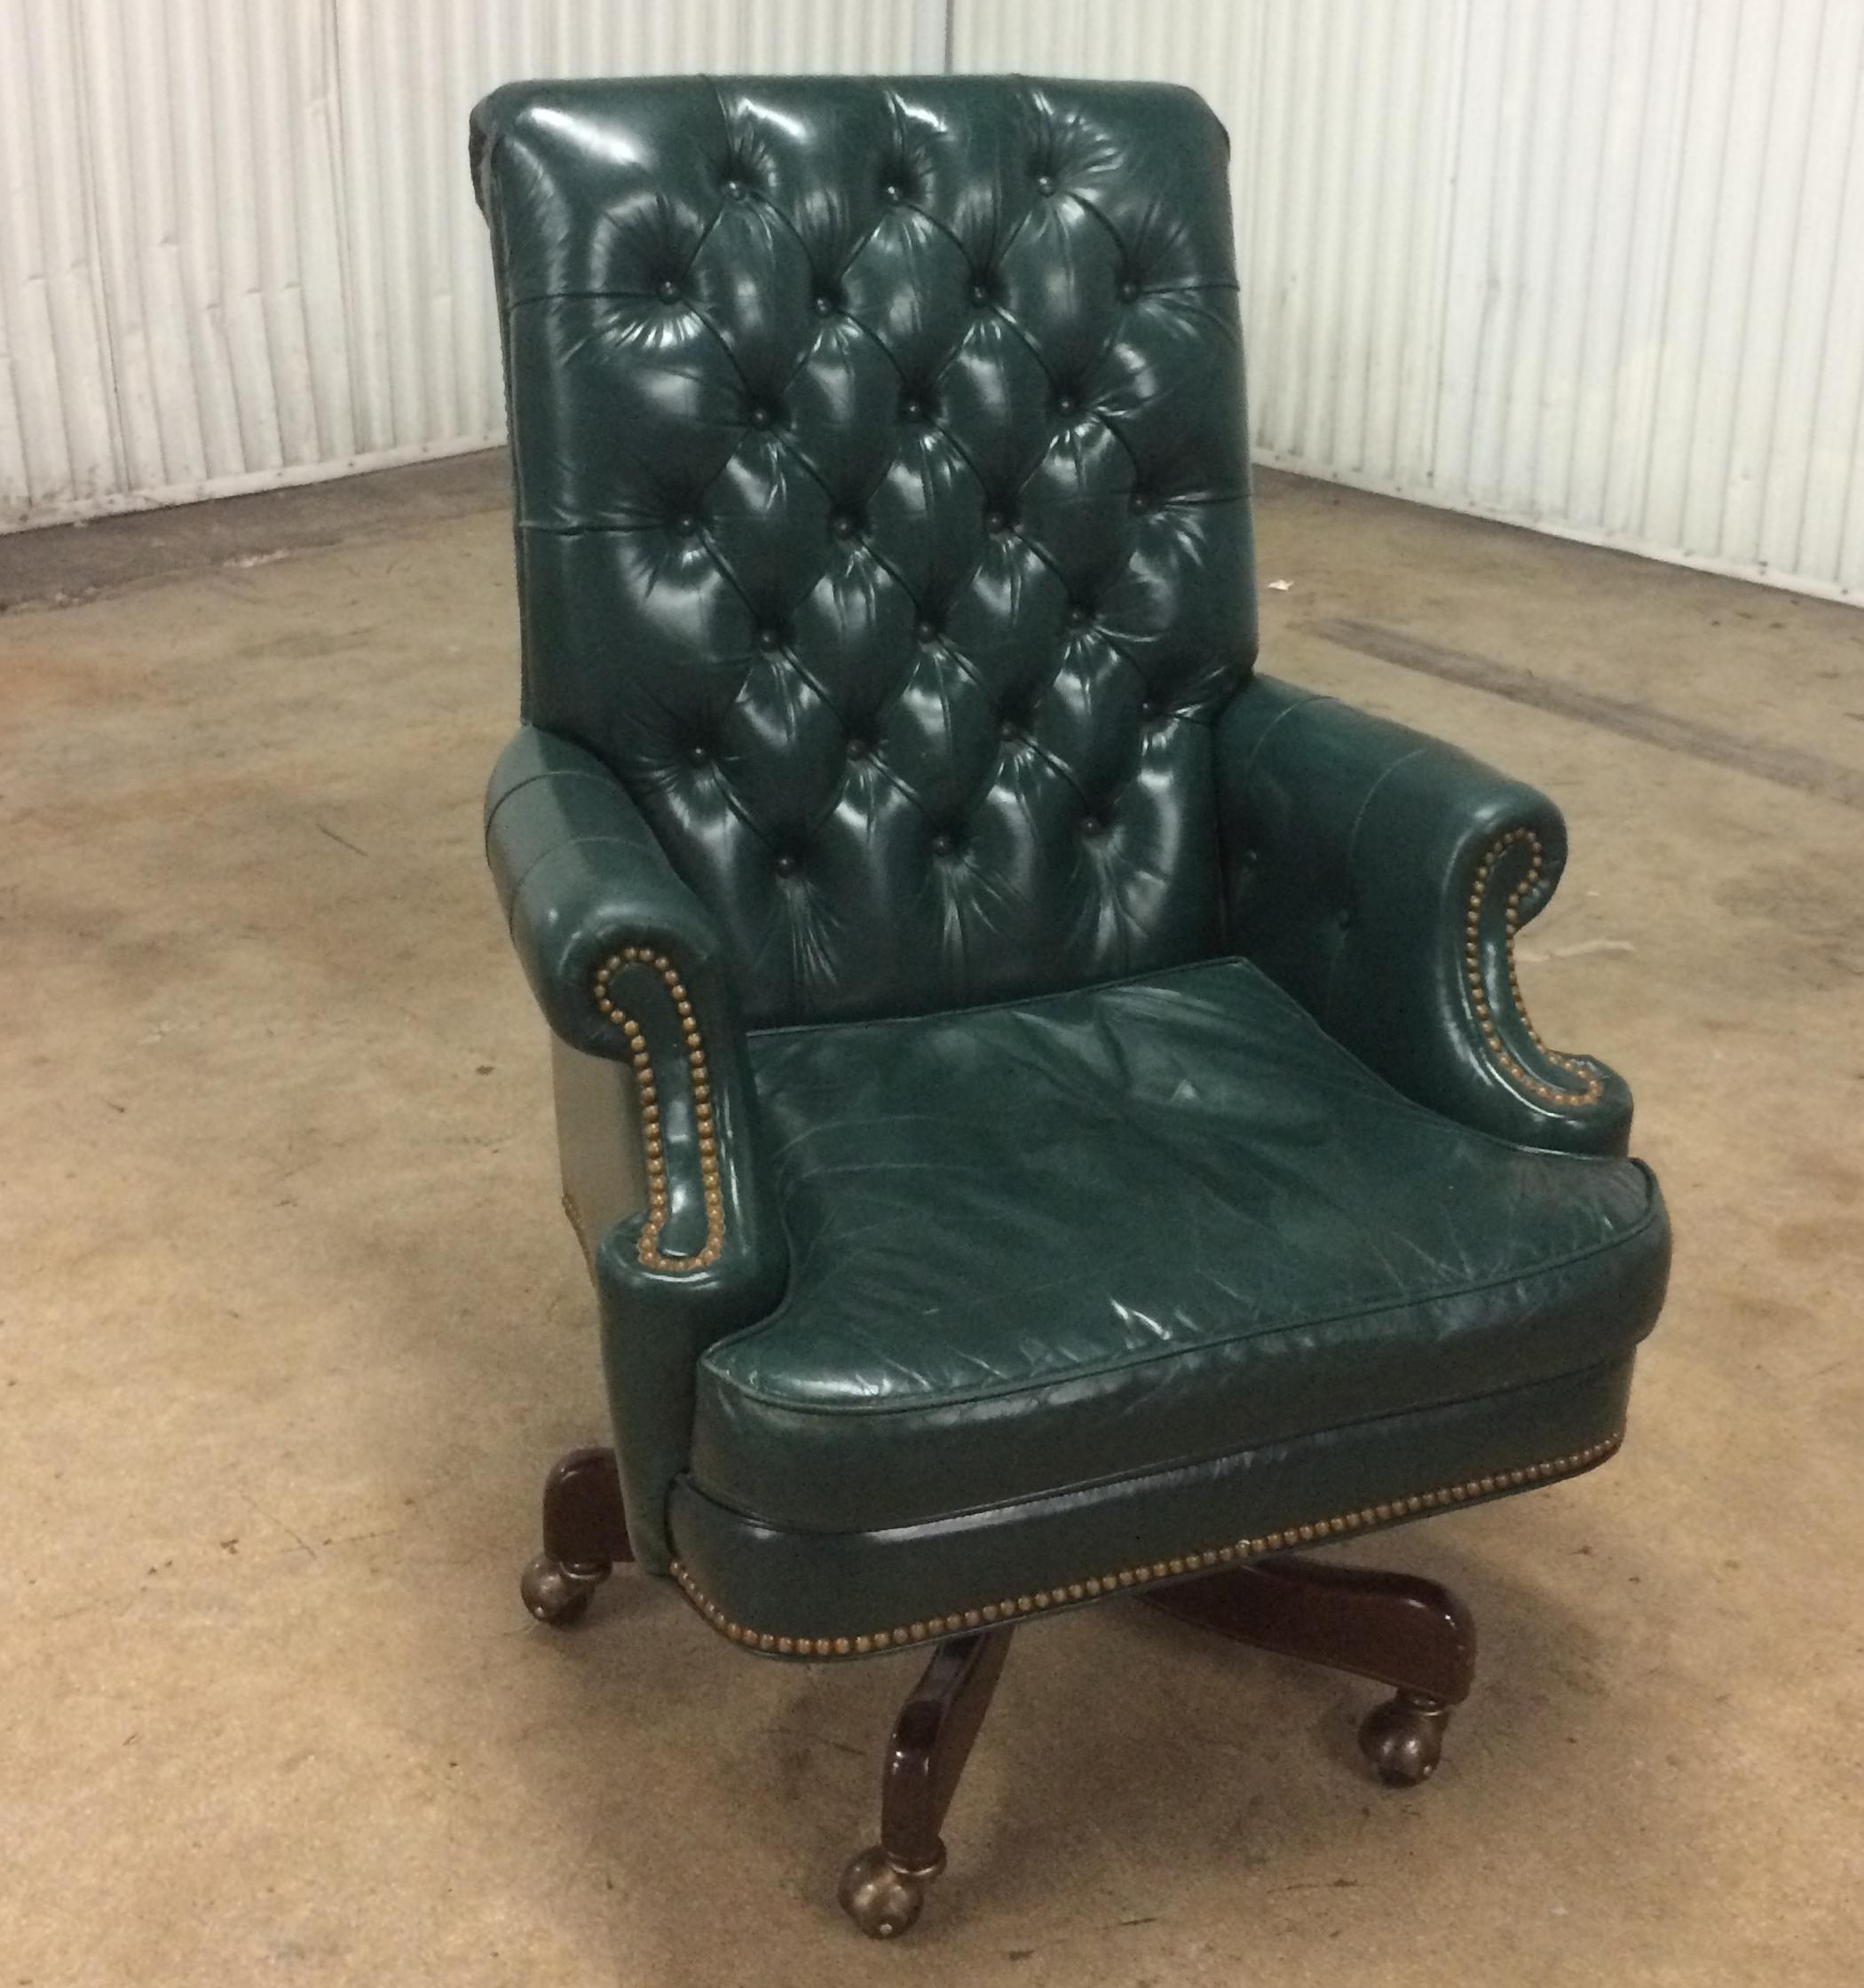 High quality green leather office chair by Cabot Wrenn. Tilts and adjust in height. Tufted leather
with brass nail decoration. Classic style executives chair.